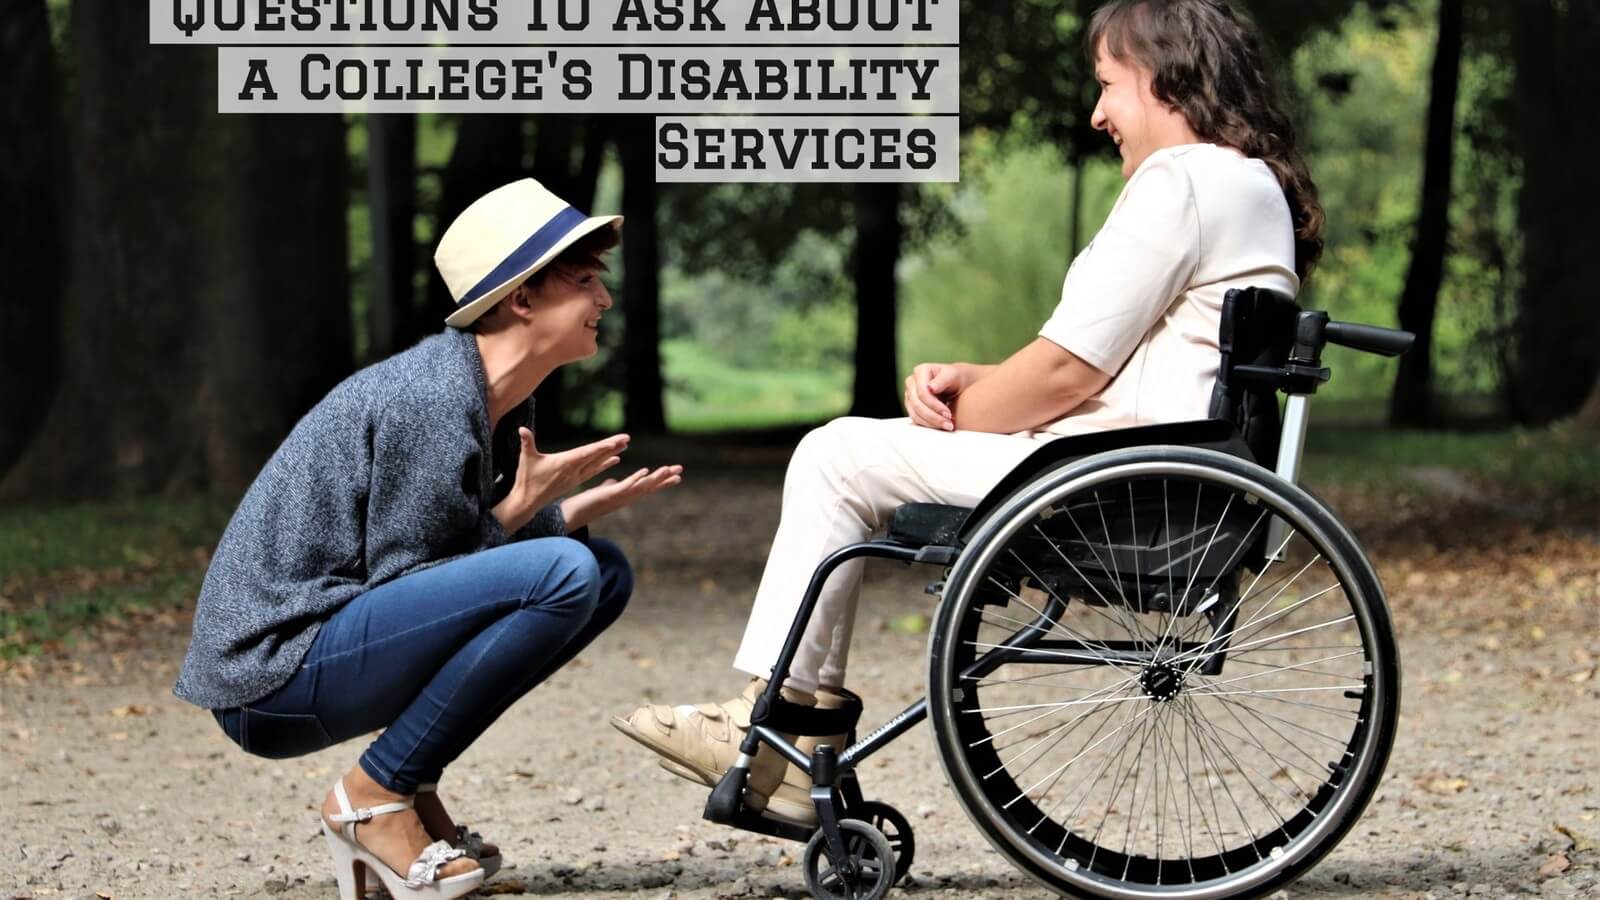 Questions to Ask about a College's Disability Services